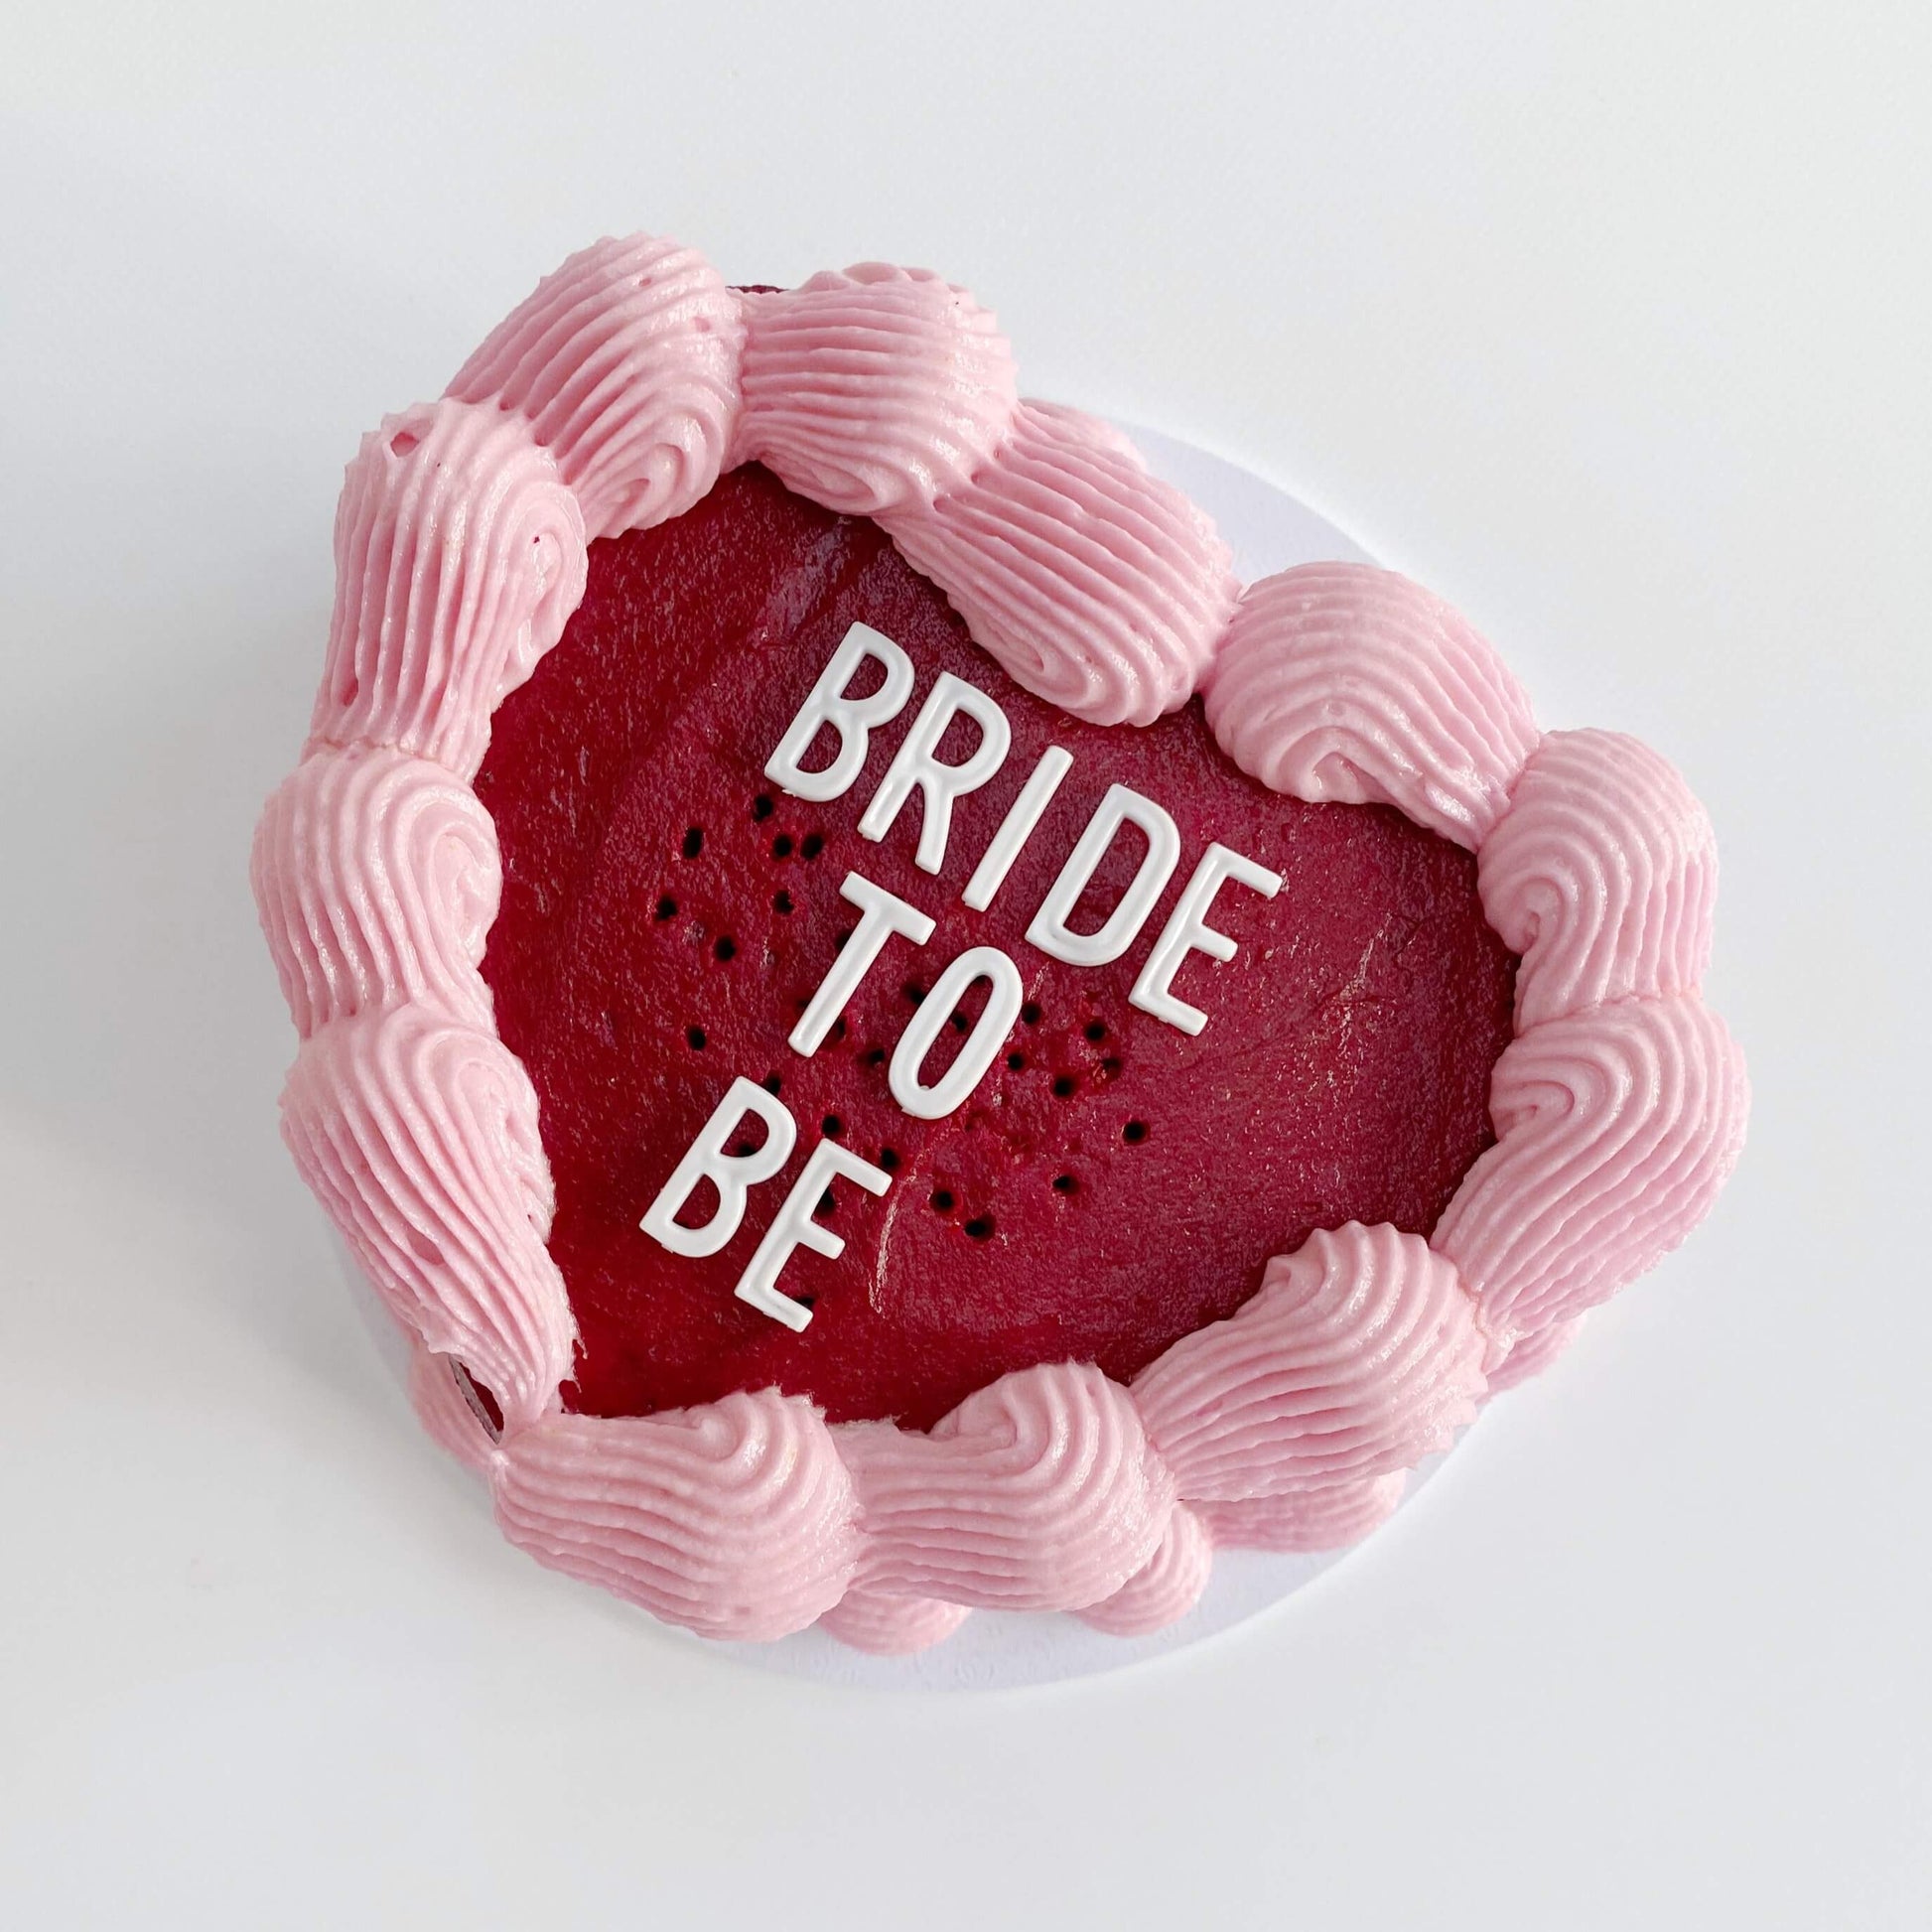 Bride To Be Heart Cake Kit